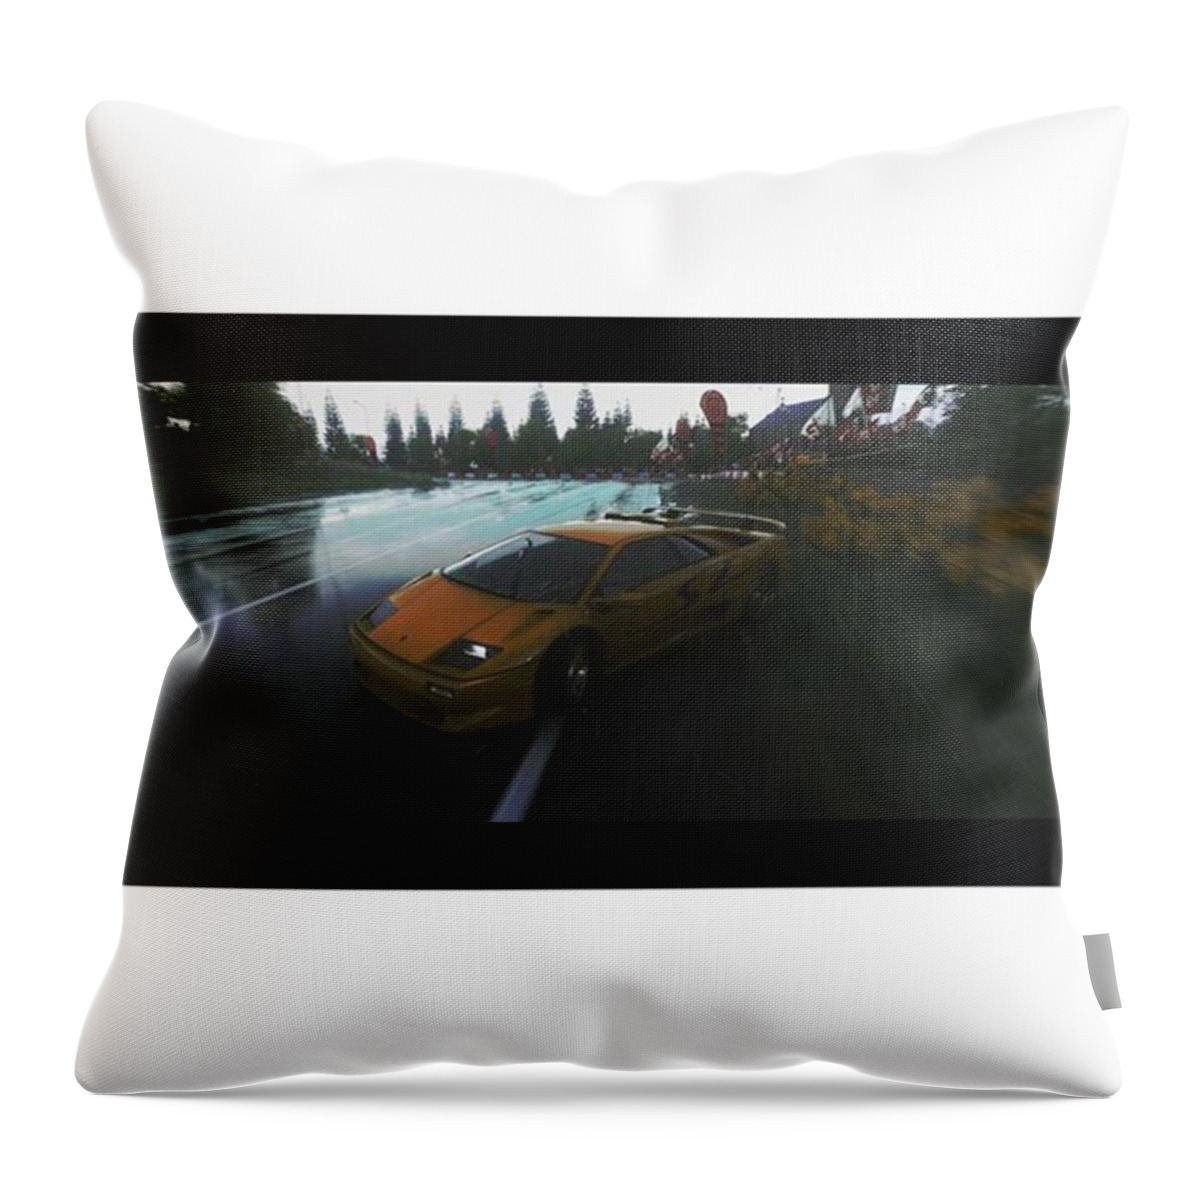 Lamborghini Throw Pillow featuring the photograph Use All The Space You Need To #drift As by Hannes Lachner